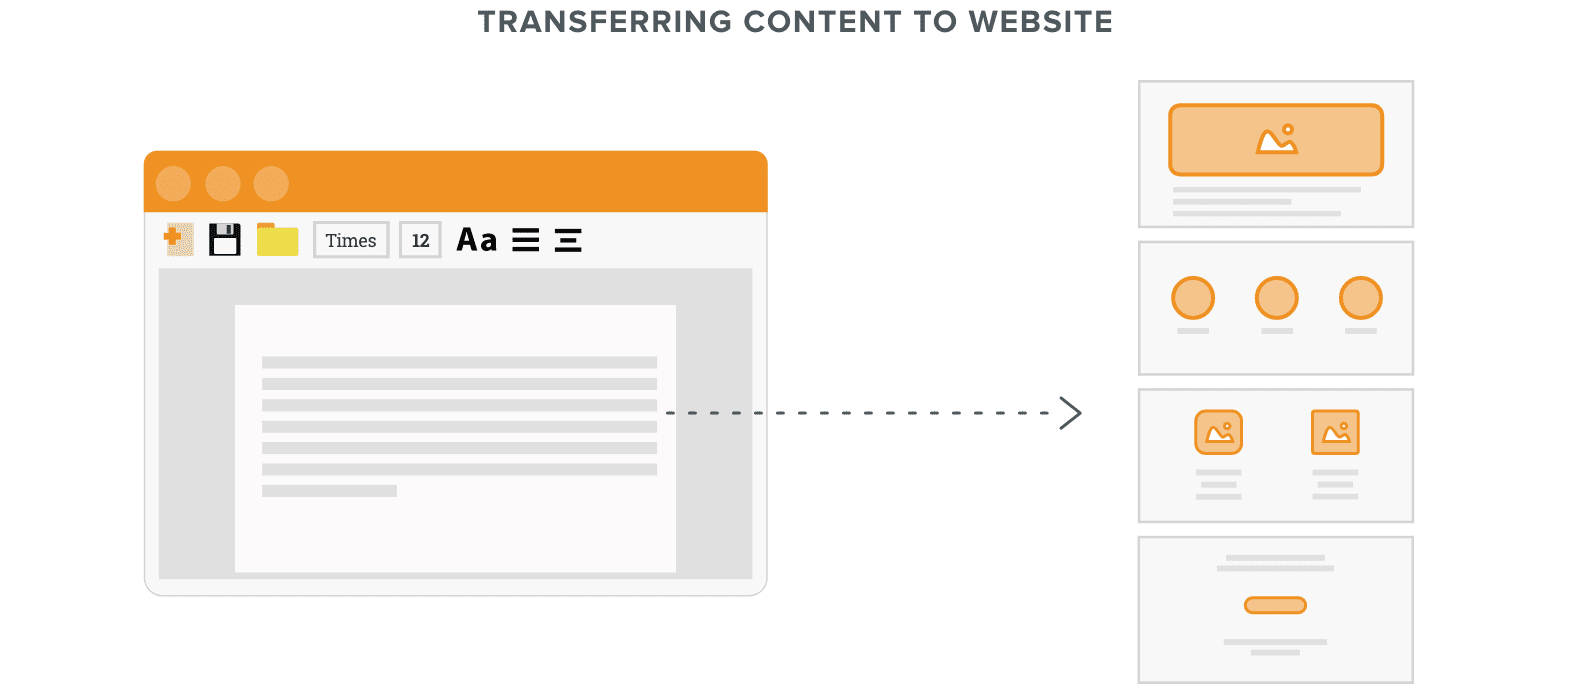 Transferring content to website